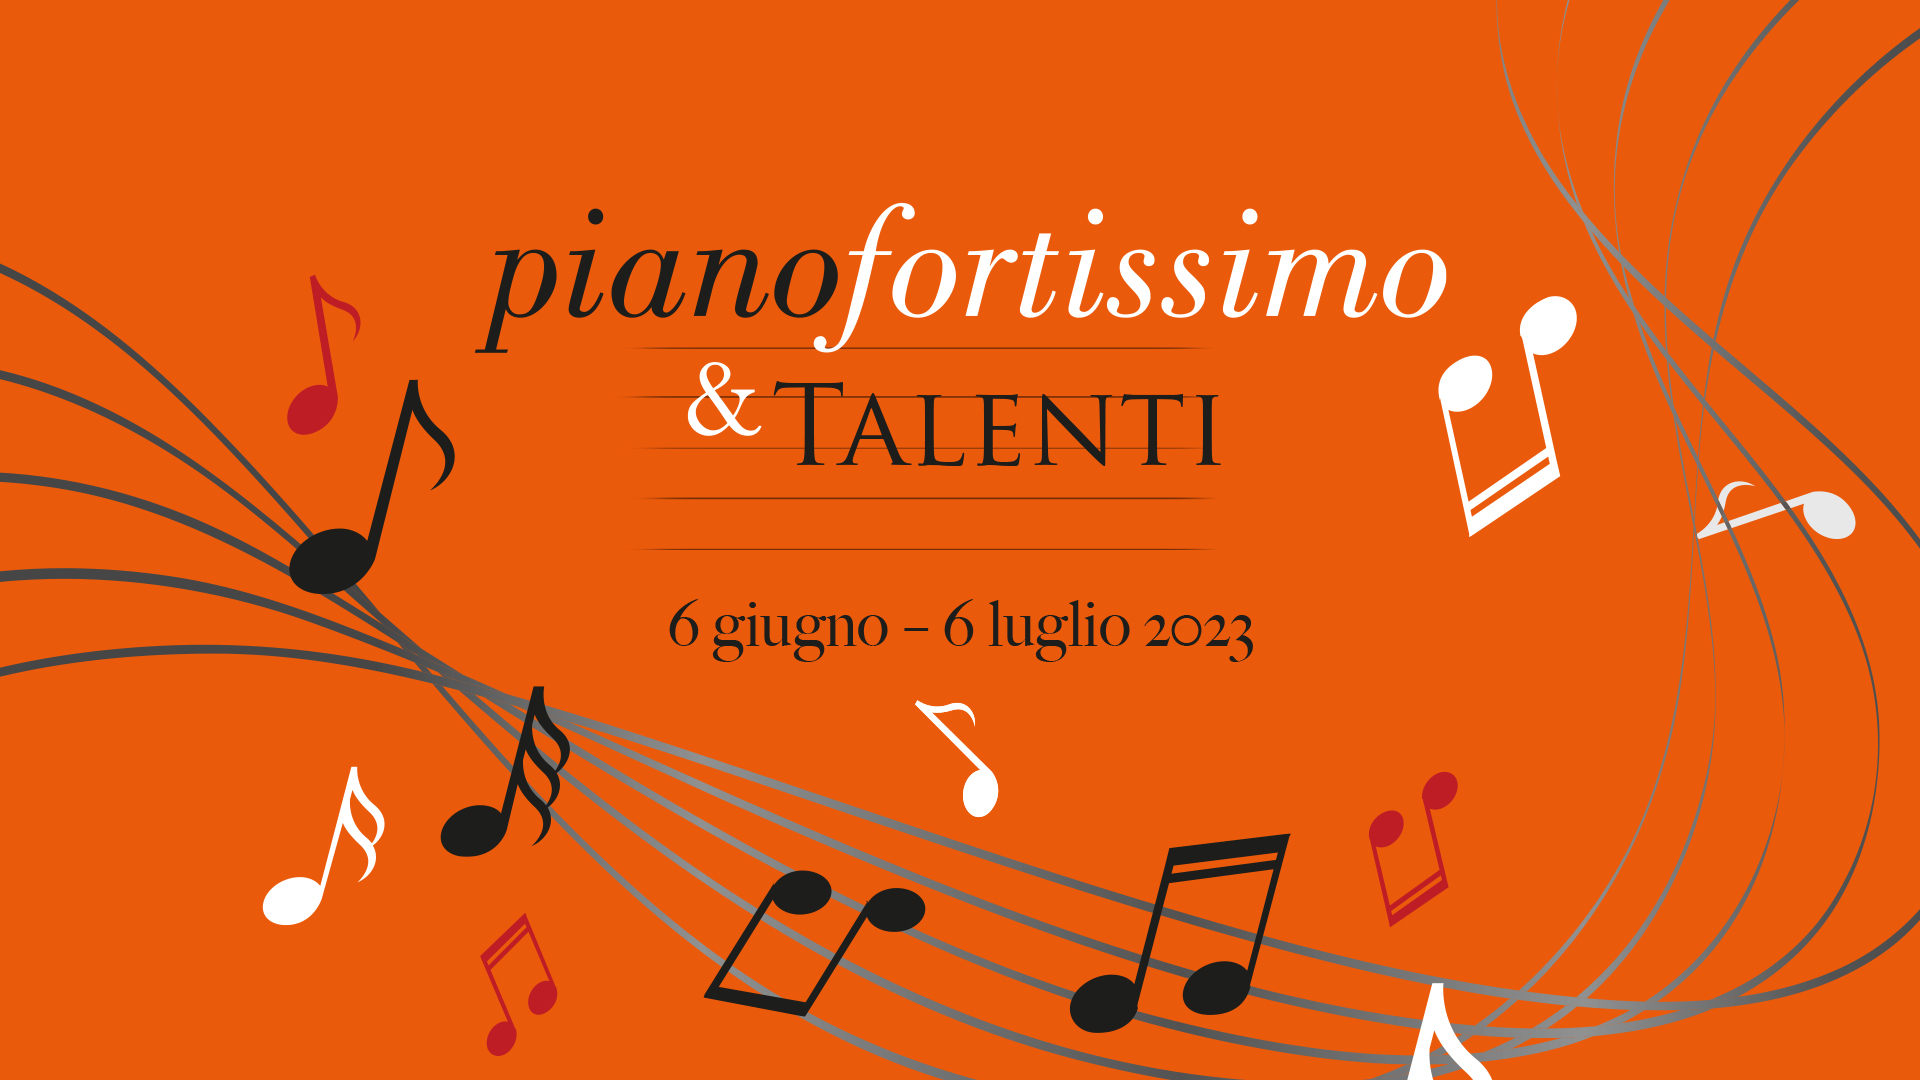 Eleven concerts, from 6 June to 6 July, will enliven the monumental contexts among the most identifying in the city and venues of the exhibition, with the Cortile dell'Archiginnasio, a spectacular backdrop for the Pianofortissimo and the thirteenth-century cloister of the Basilica of Santo Stefano, to welcome Talenti.